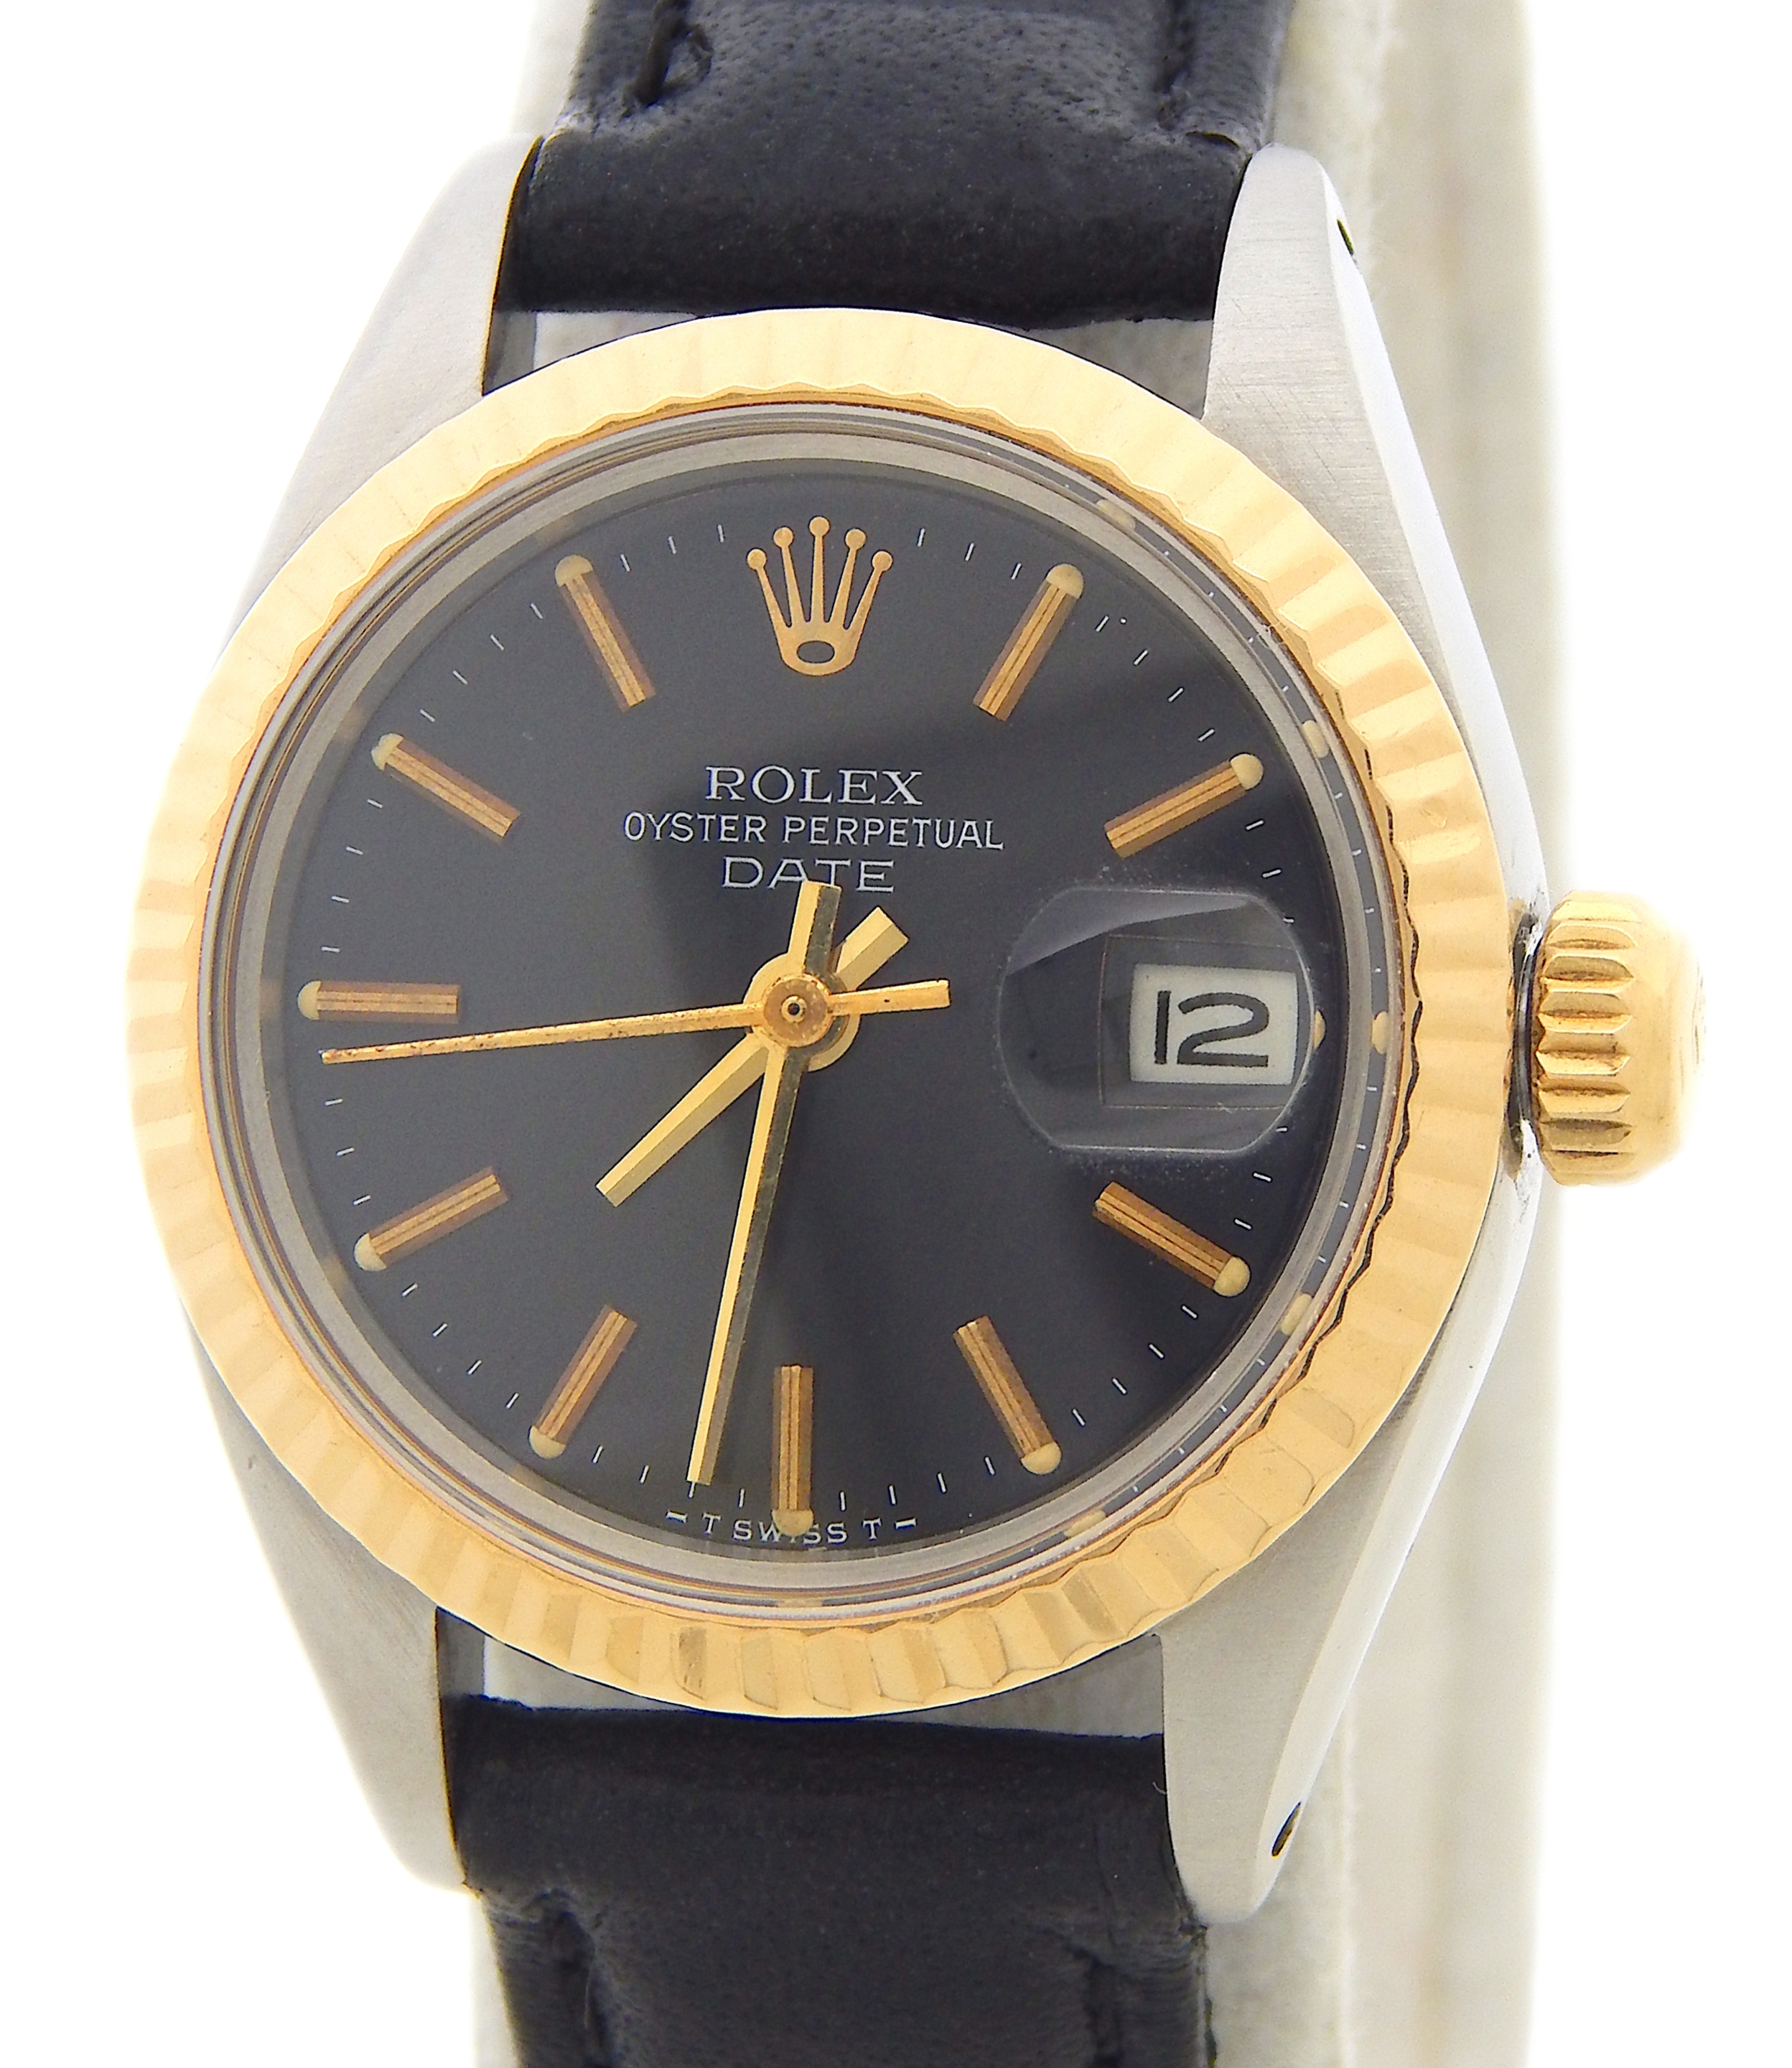 Ladies Rolex Two-Tone Date Watch Model Ref. 6916 with Dial (SKU 7064644BLAMT) -